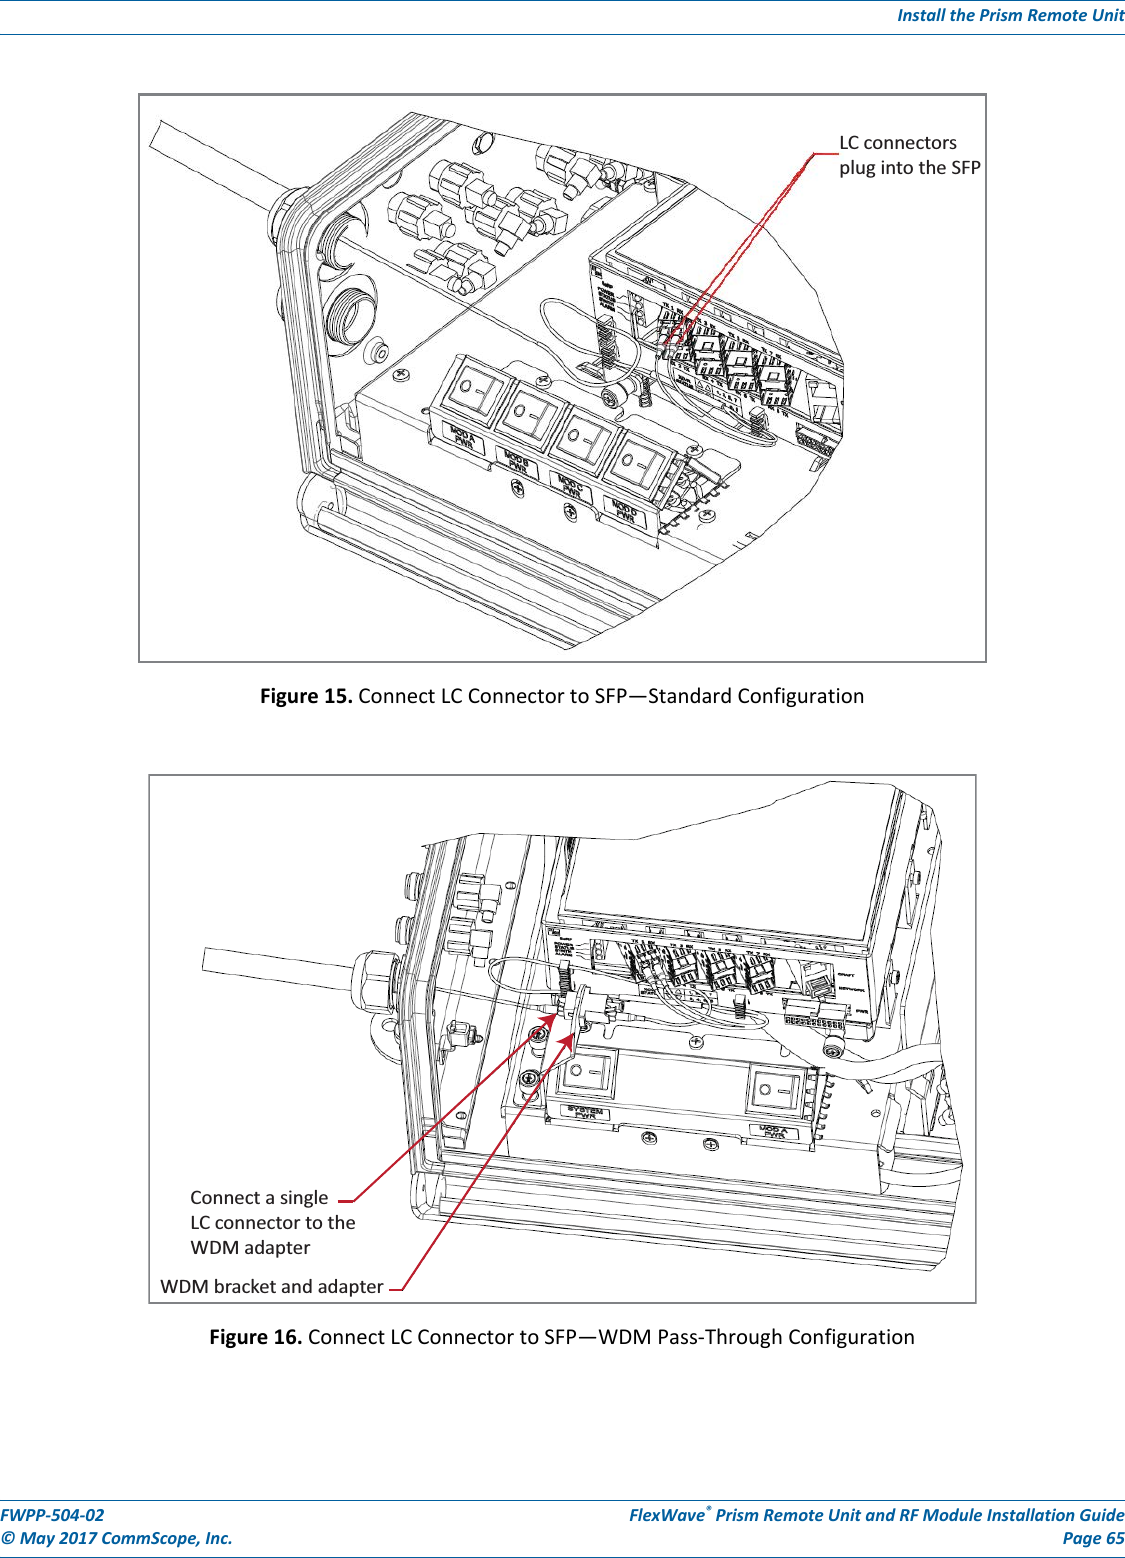 Install the Prism Remote UnitFWPP-504-02 FlexWave® Prism Remote Unit and RF Module Installation Guide© May 2017 CommScope, Inc. Page 65Figure 15. Connect LC Connector to SFP—Standard ConfigurationFigure 16. Connect LC Connector to SFP—WDM Pass-Through ConfigurationLC connectorsplug into the SFPConnect a singleLC connector to theWDM adapterWDM bracket and adapter